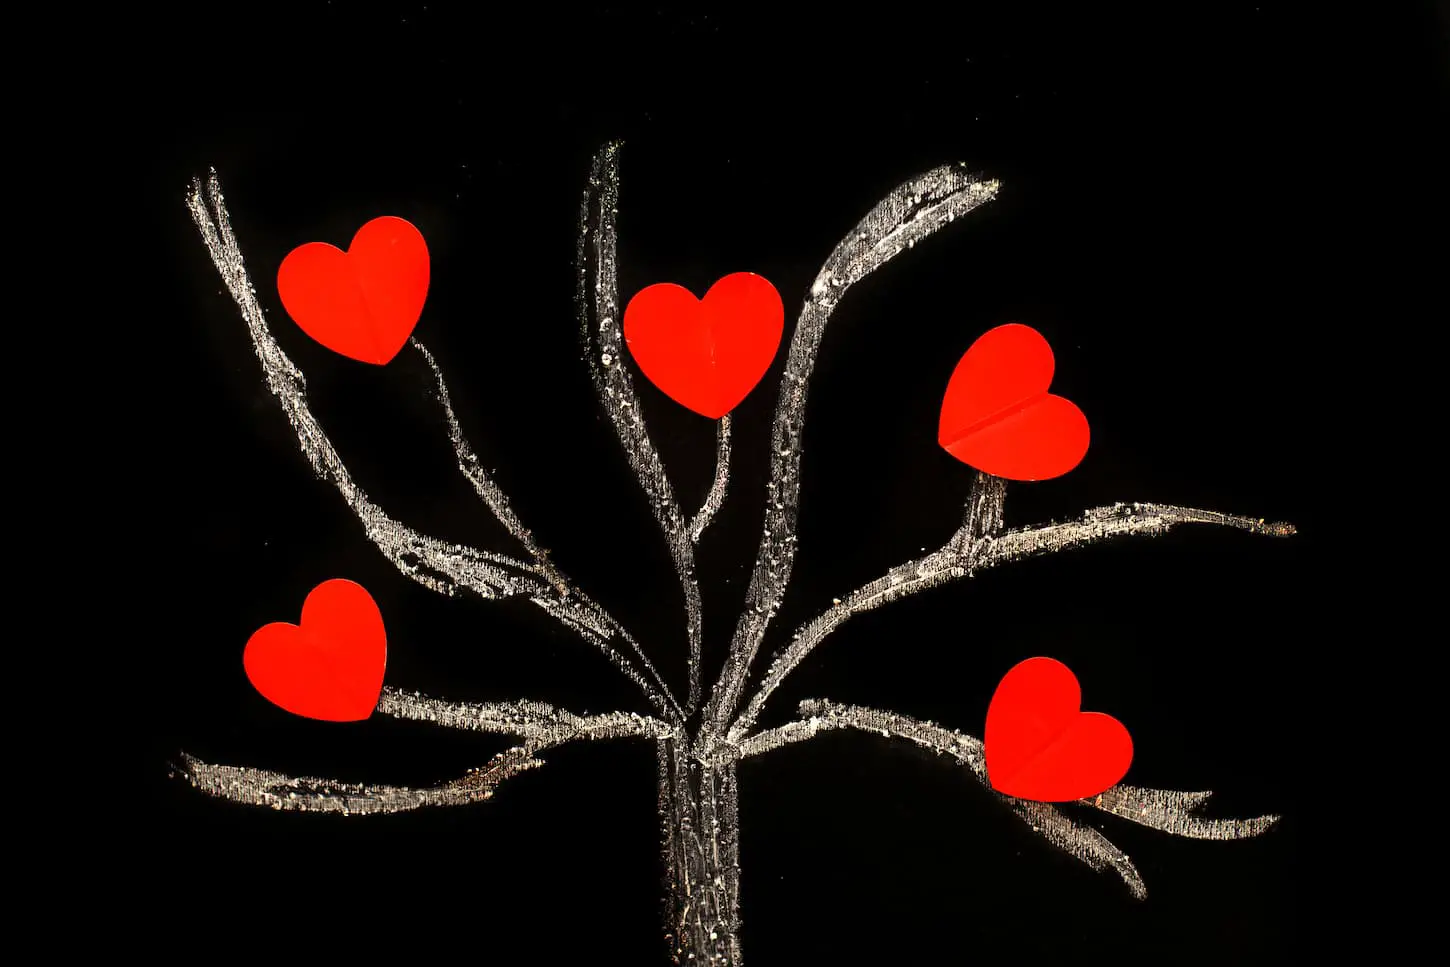 An image of a chalk drawing tree on a black chalkboard with red hearts on a tree as a concept of a large family.